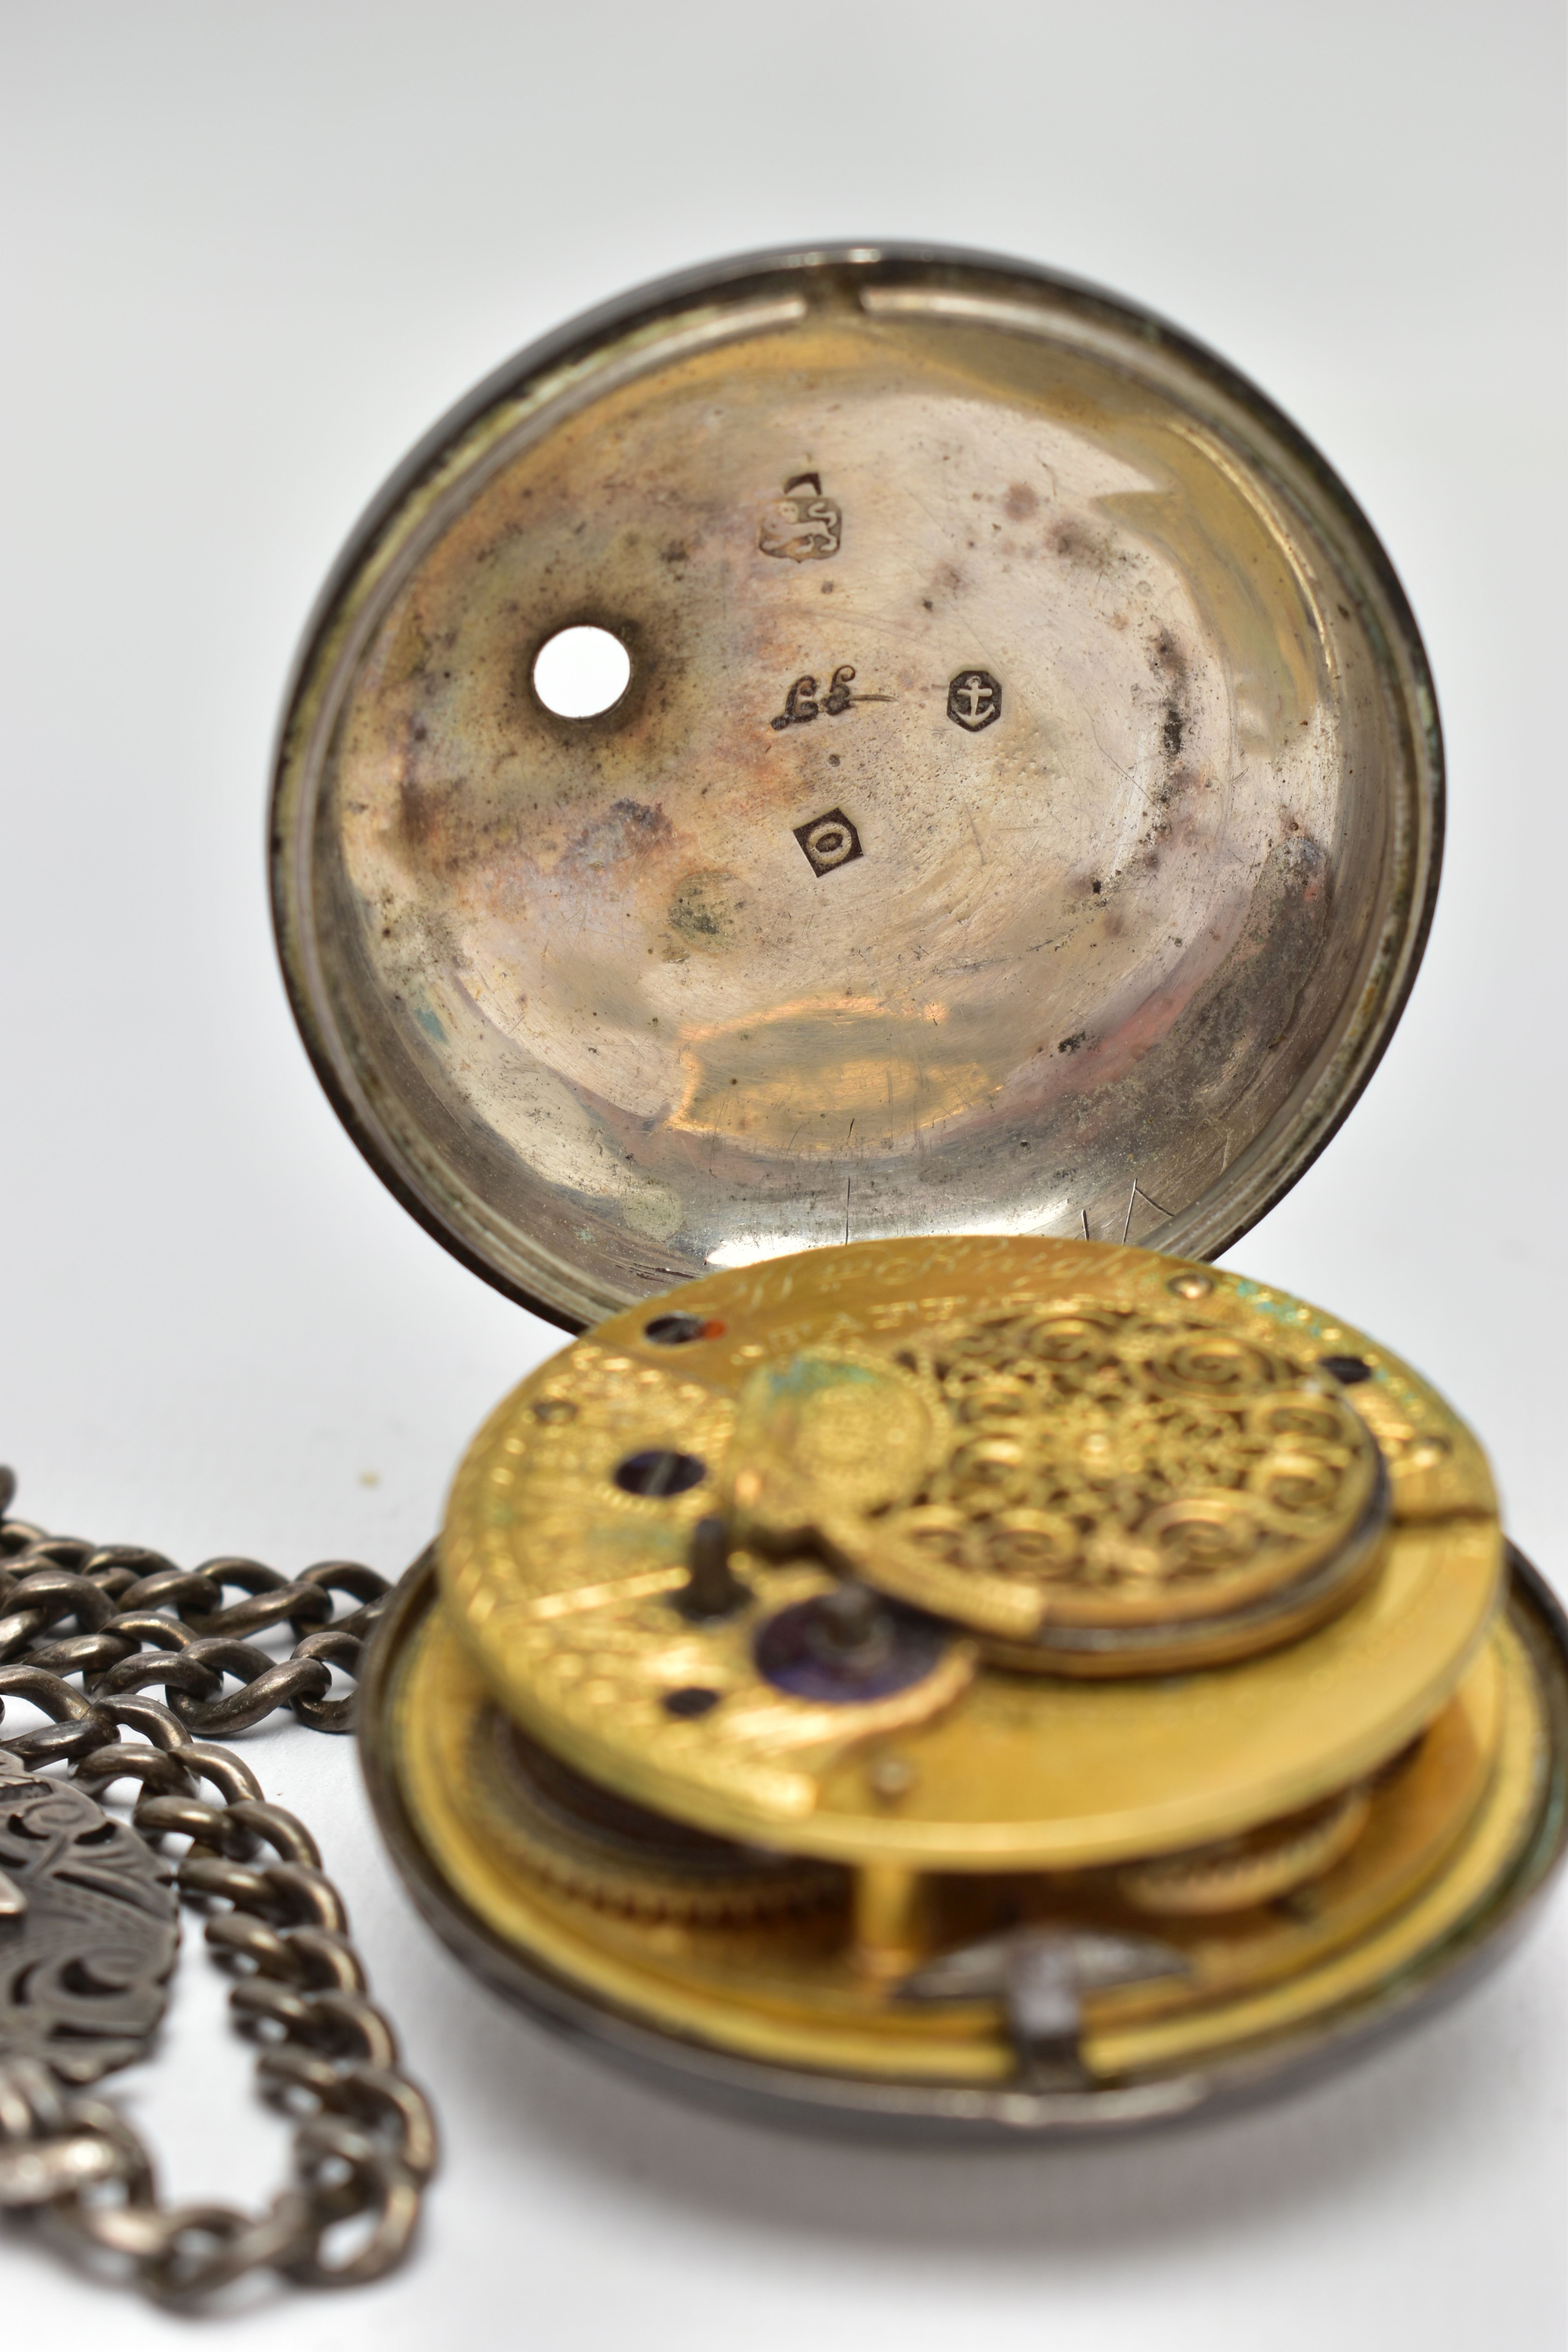 A SILVER OPEN FACE POCKET WATCH AND ALBERT CHAIN, key wound watch, white damaged ceramic dial, - Image 4 of 6